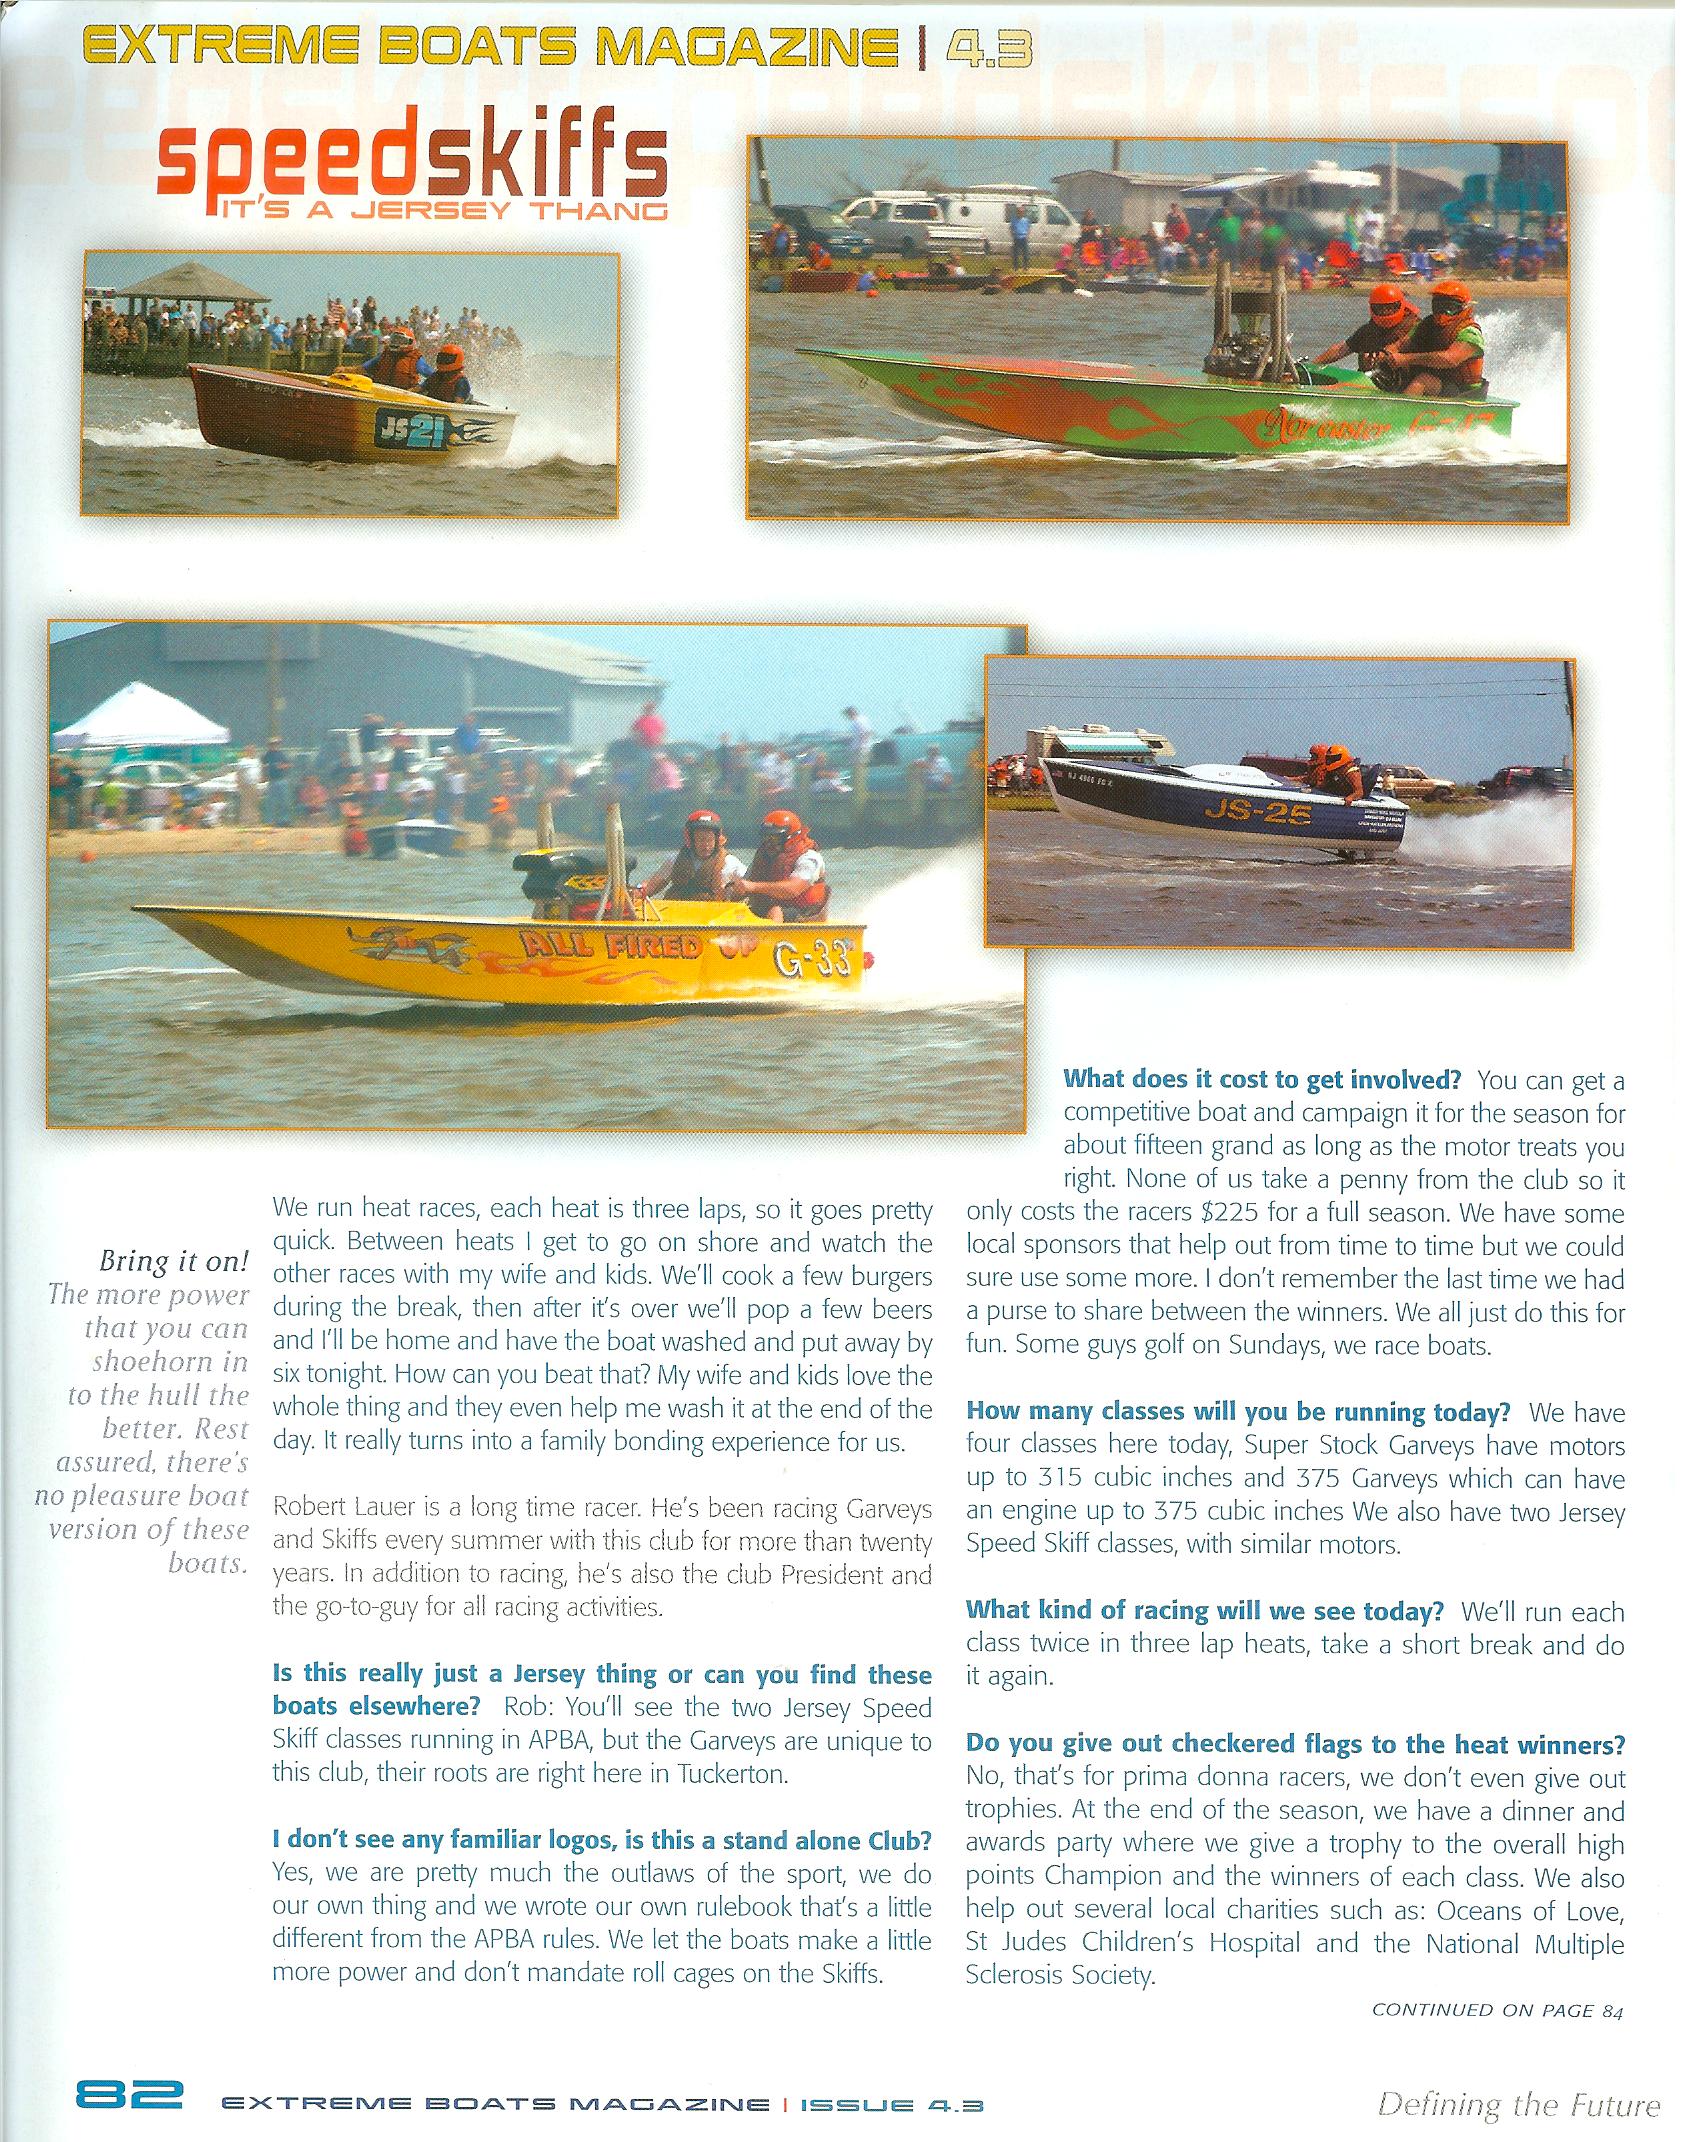 extremeboats2007pg82.jpg